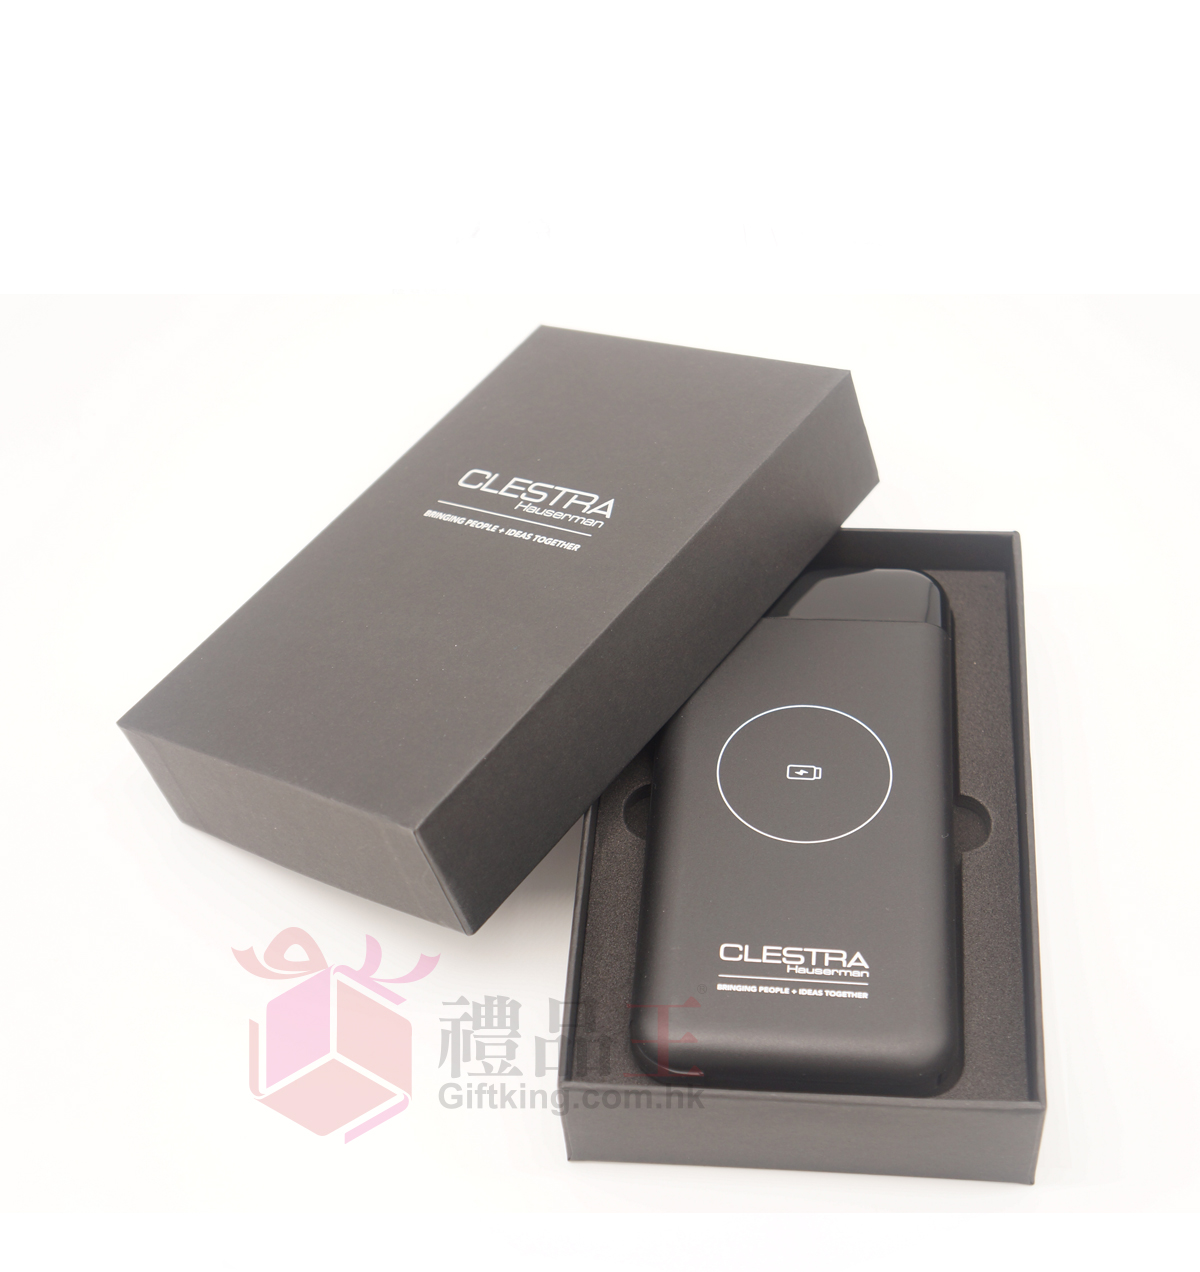 Clestra power bank (Mobile gift)